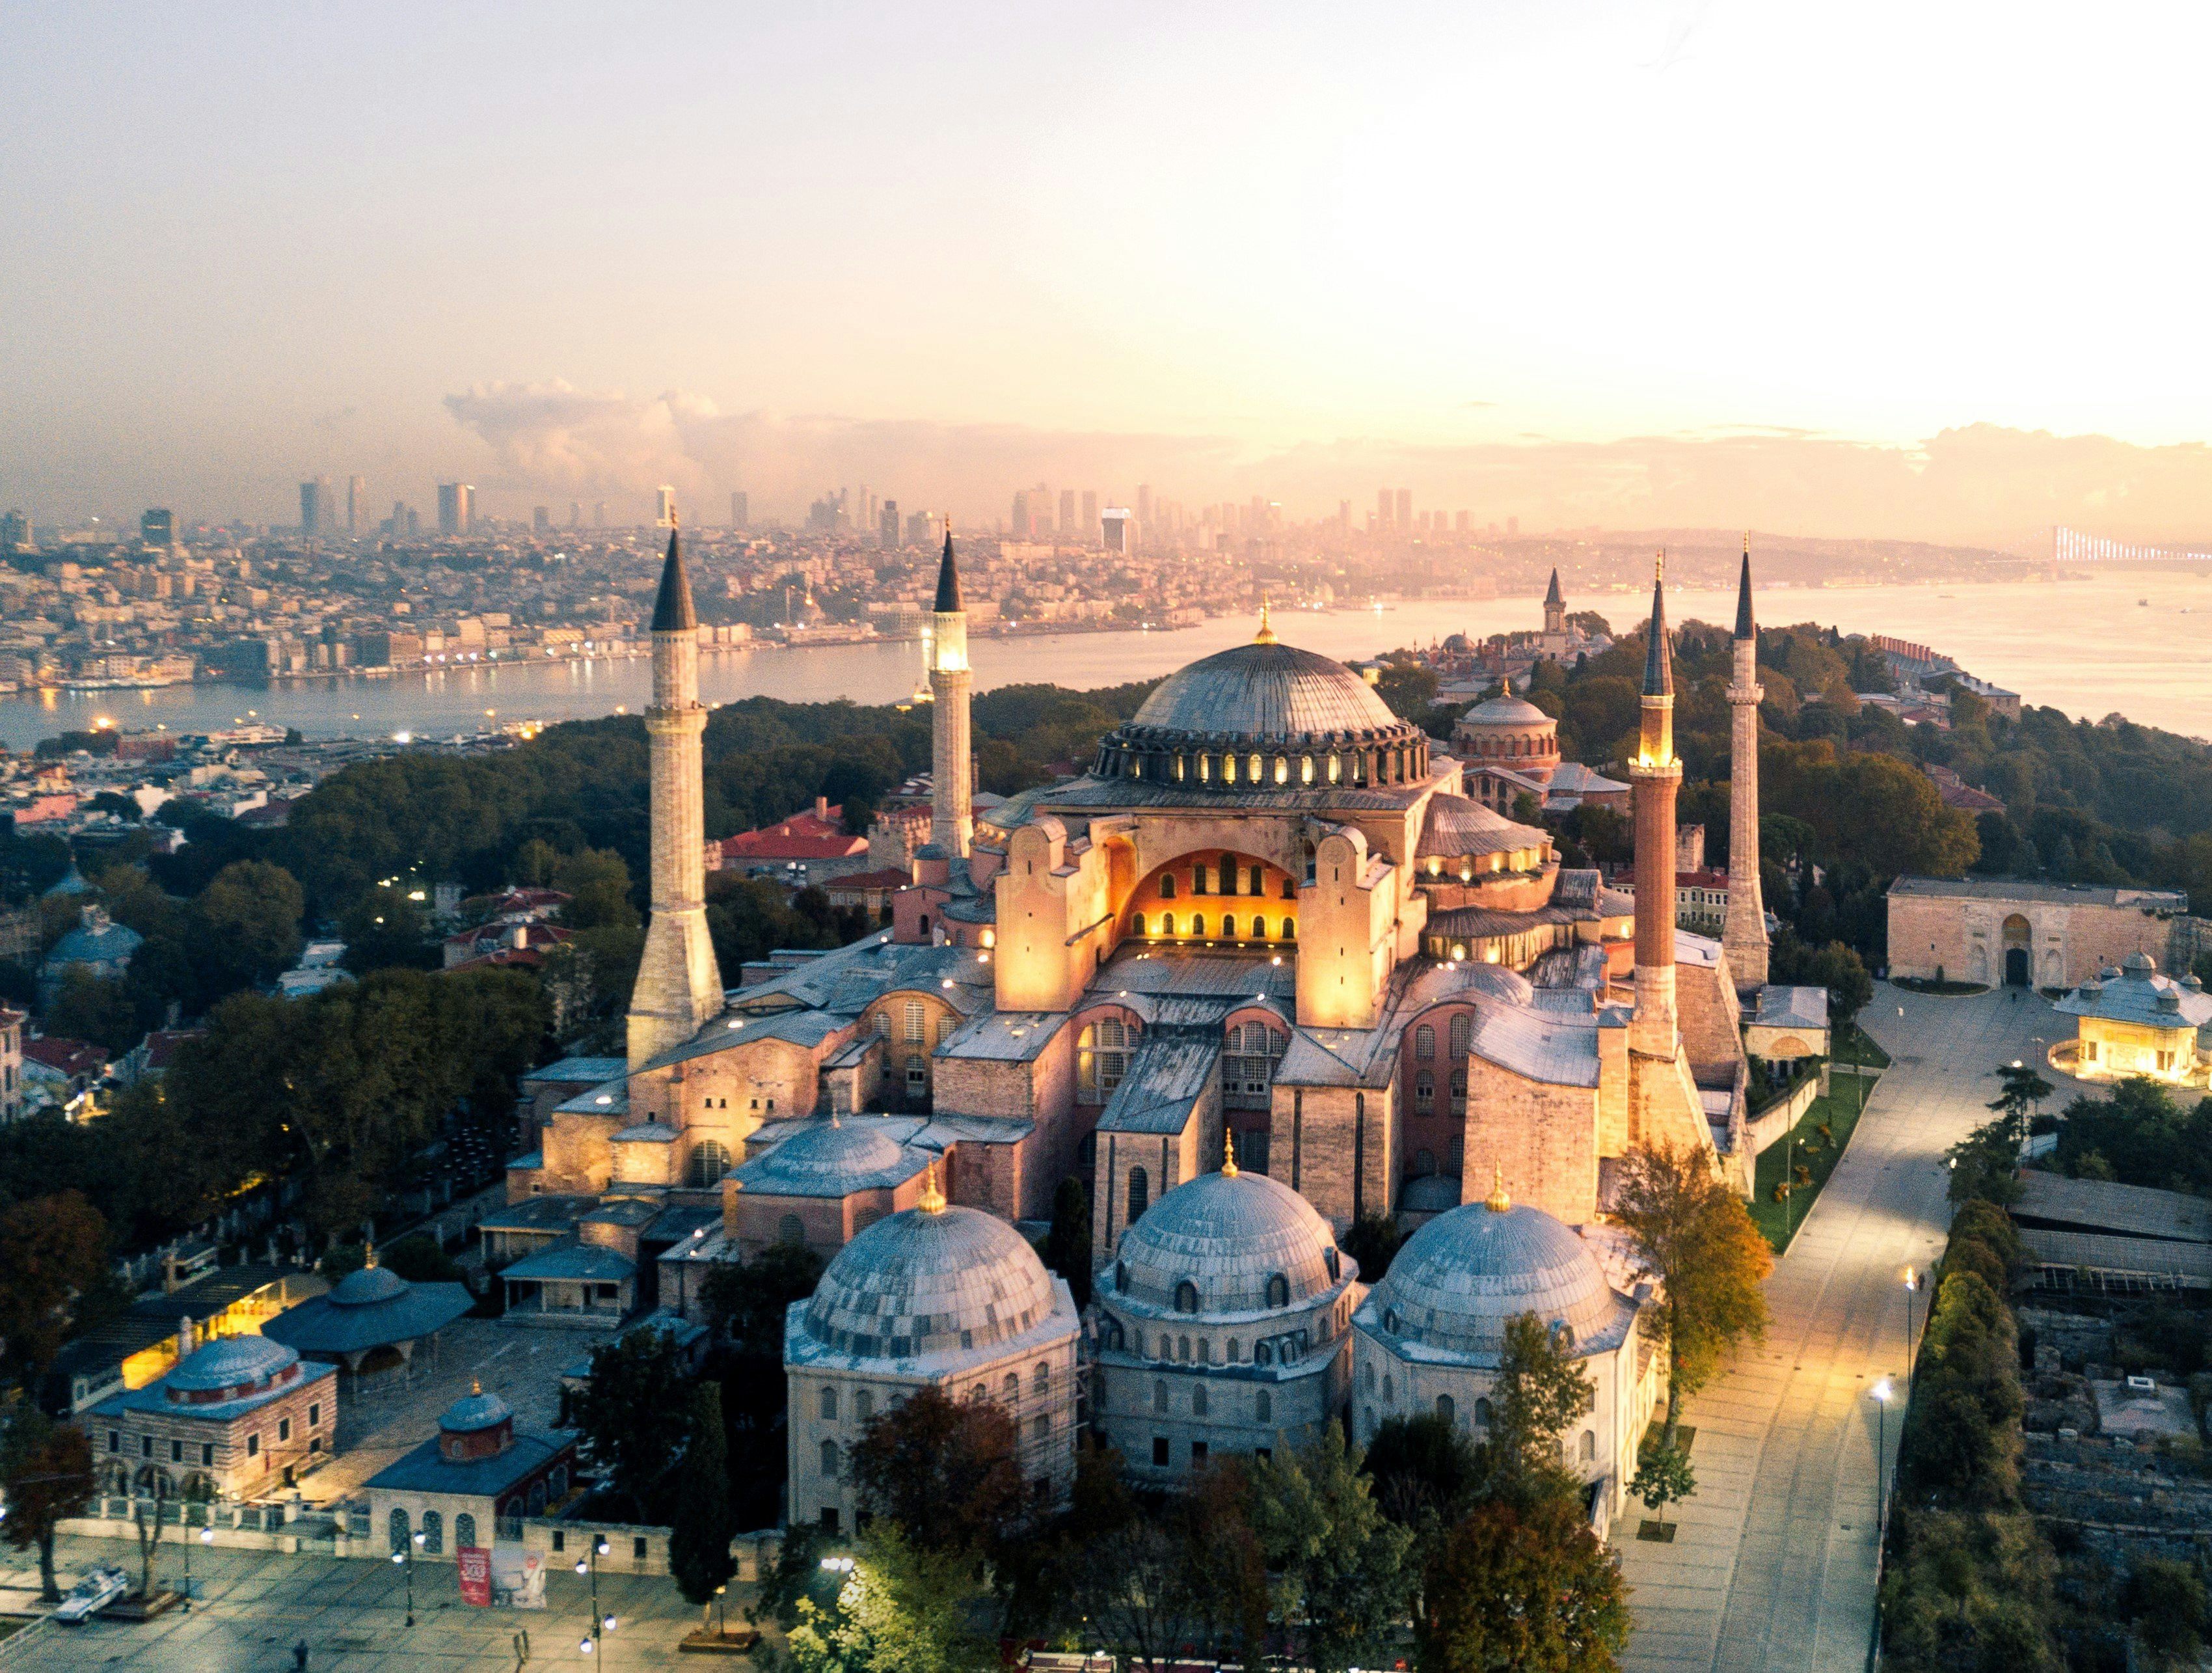 An aerial view of the Hagia Sophia in Istanbul, a former church and mosque and now museum. The building is large and white with four towering minarets on each corner and a domed ceiling. Behind the monument, the Istanbul skyline is visible, including the Bosphorus River that runs through its centre.